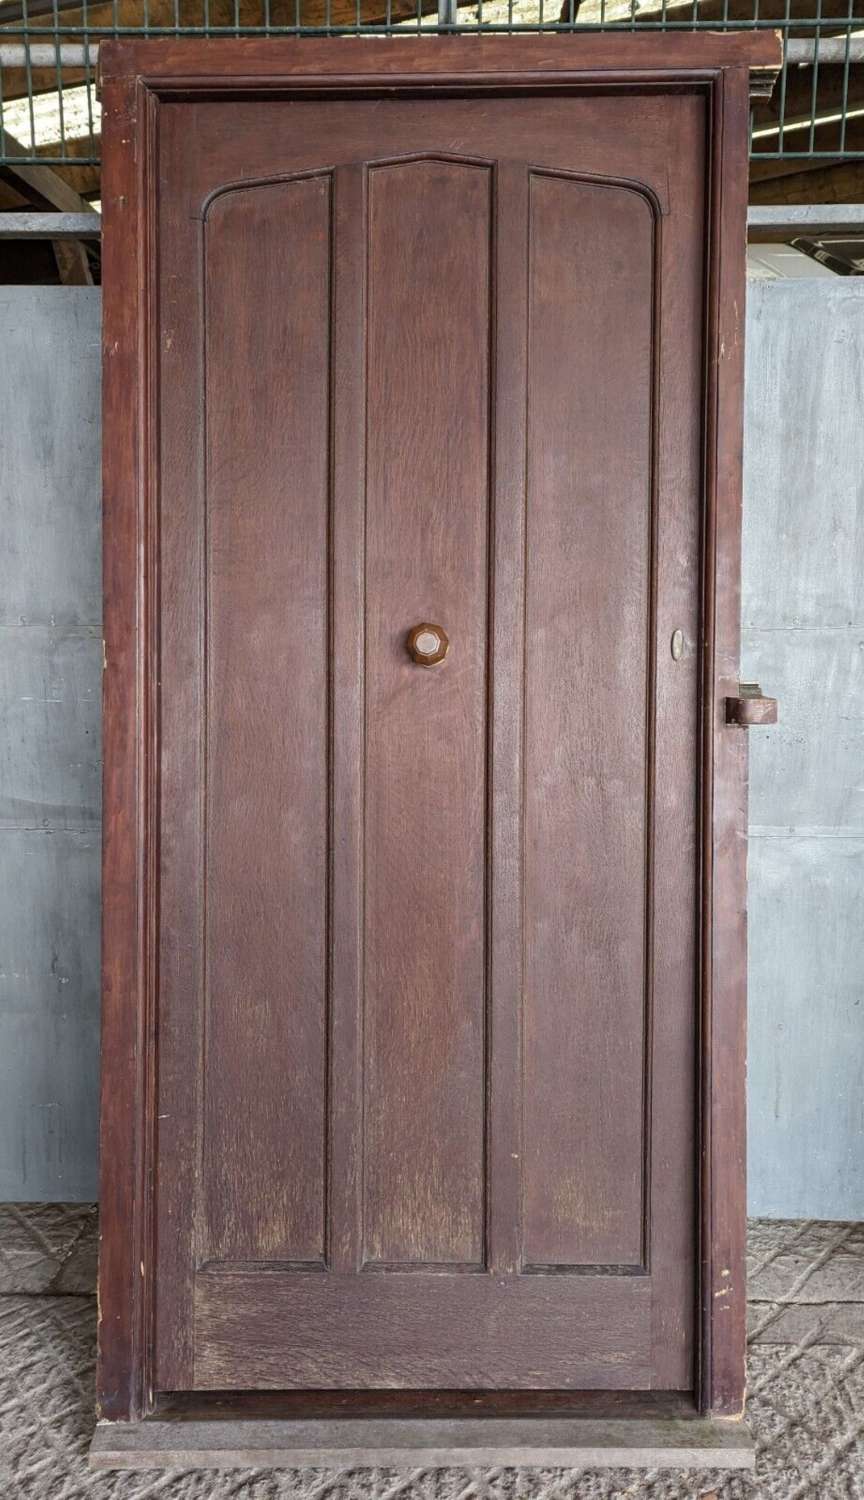 DE0970 A GOTHIC STYLE RECLAIMED OAK FRONT / EXTERNAL DOOR AND FRAME